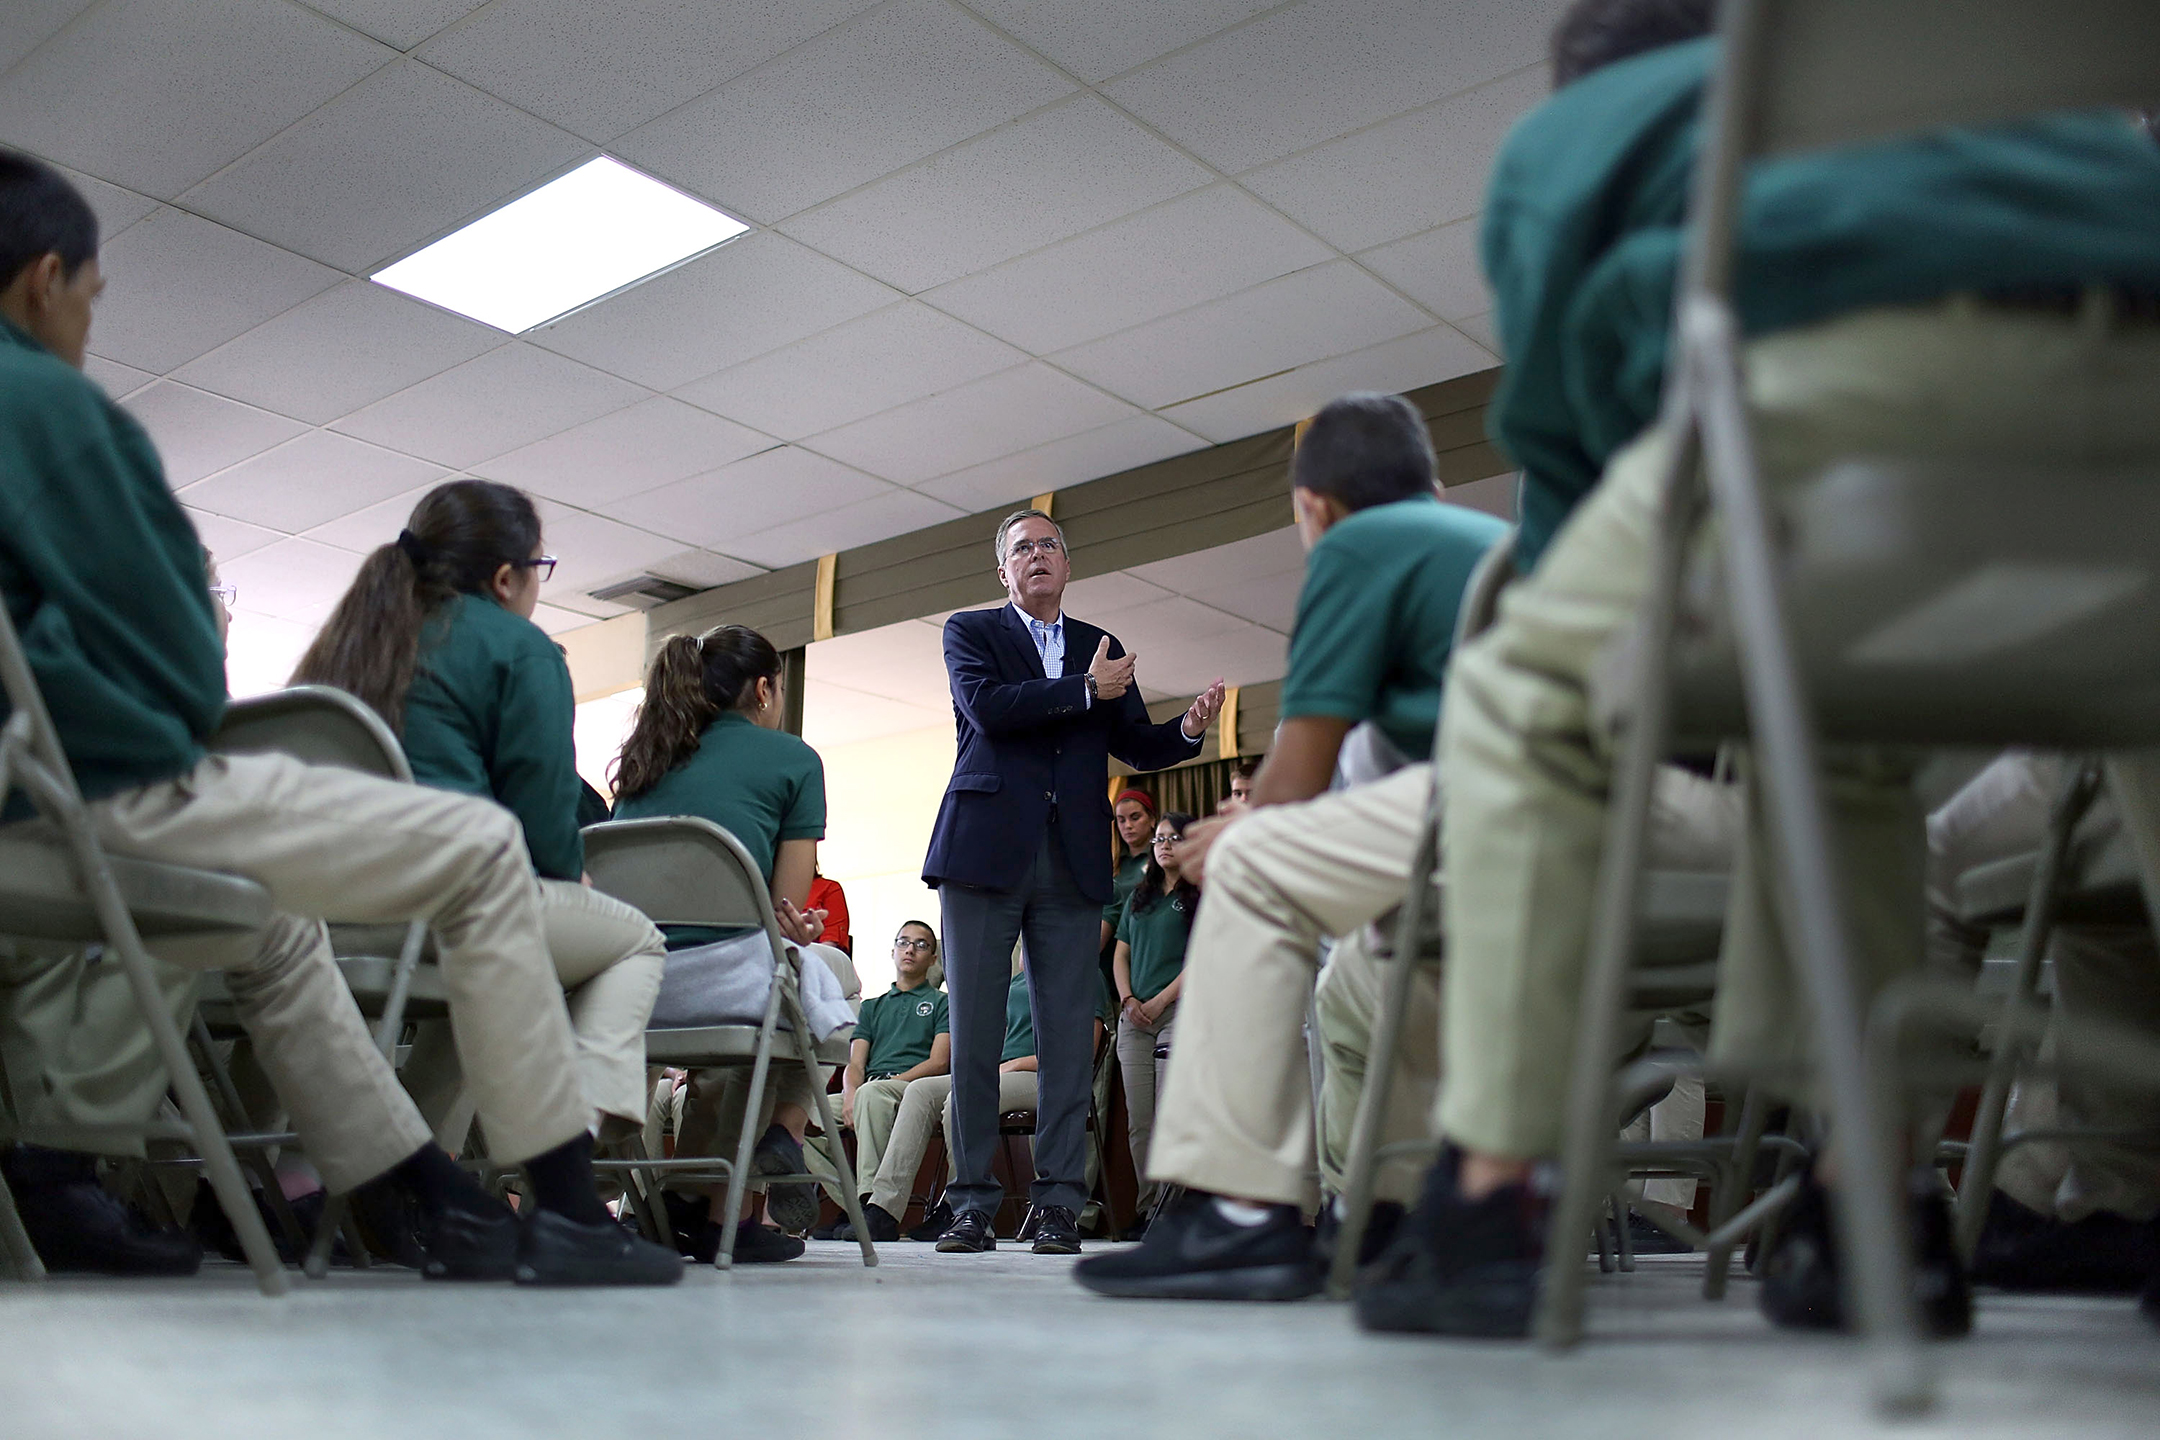 jeb bush, standing in a suit at the center of the photograph, talks with a group of students who are seated in front of him